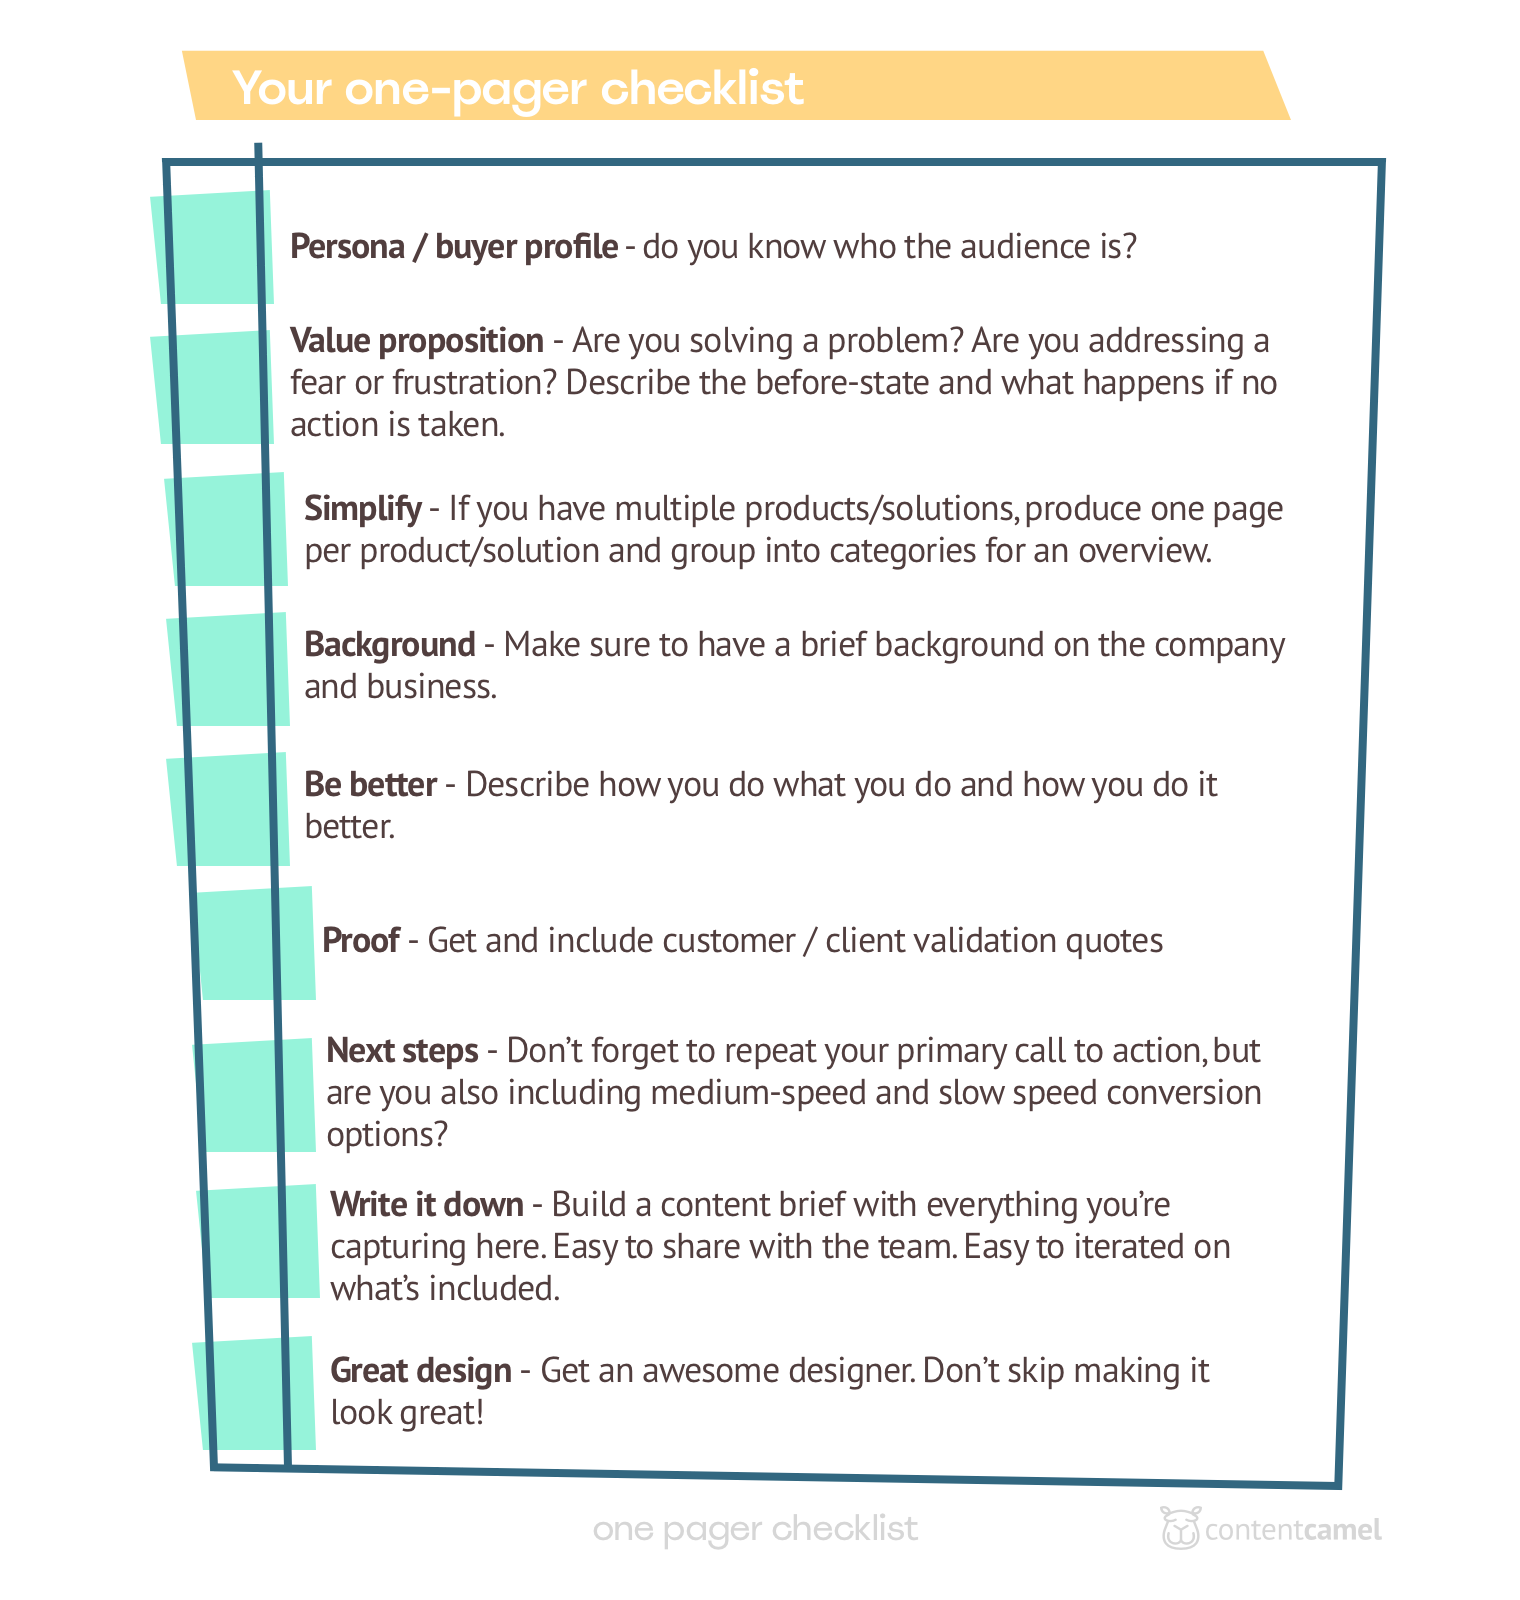 /uploads/2021/04/one-pager-checklist-for-marketing-sales.png